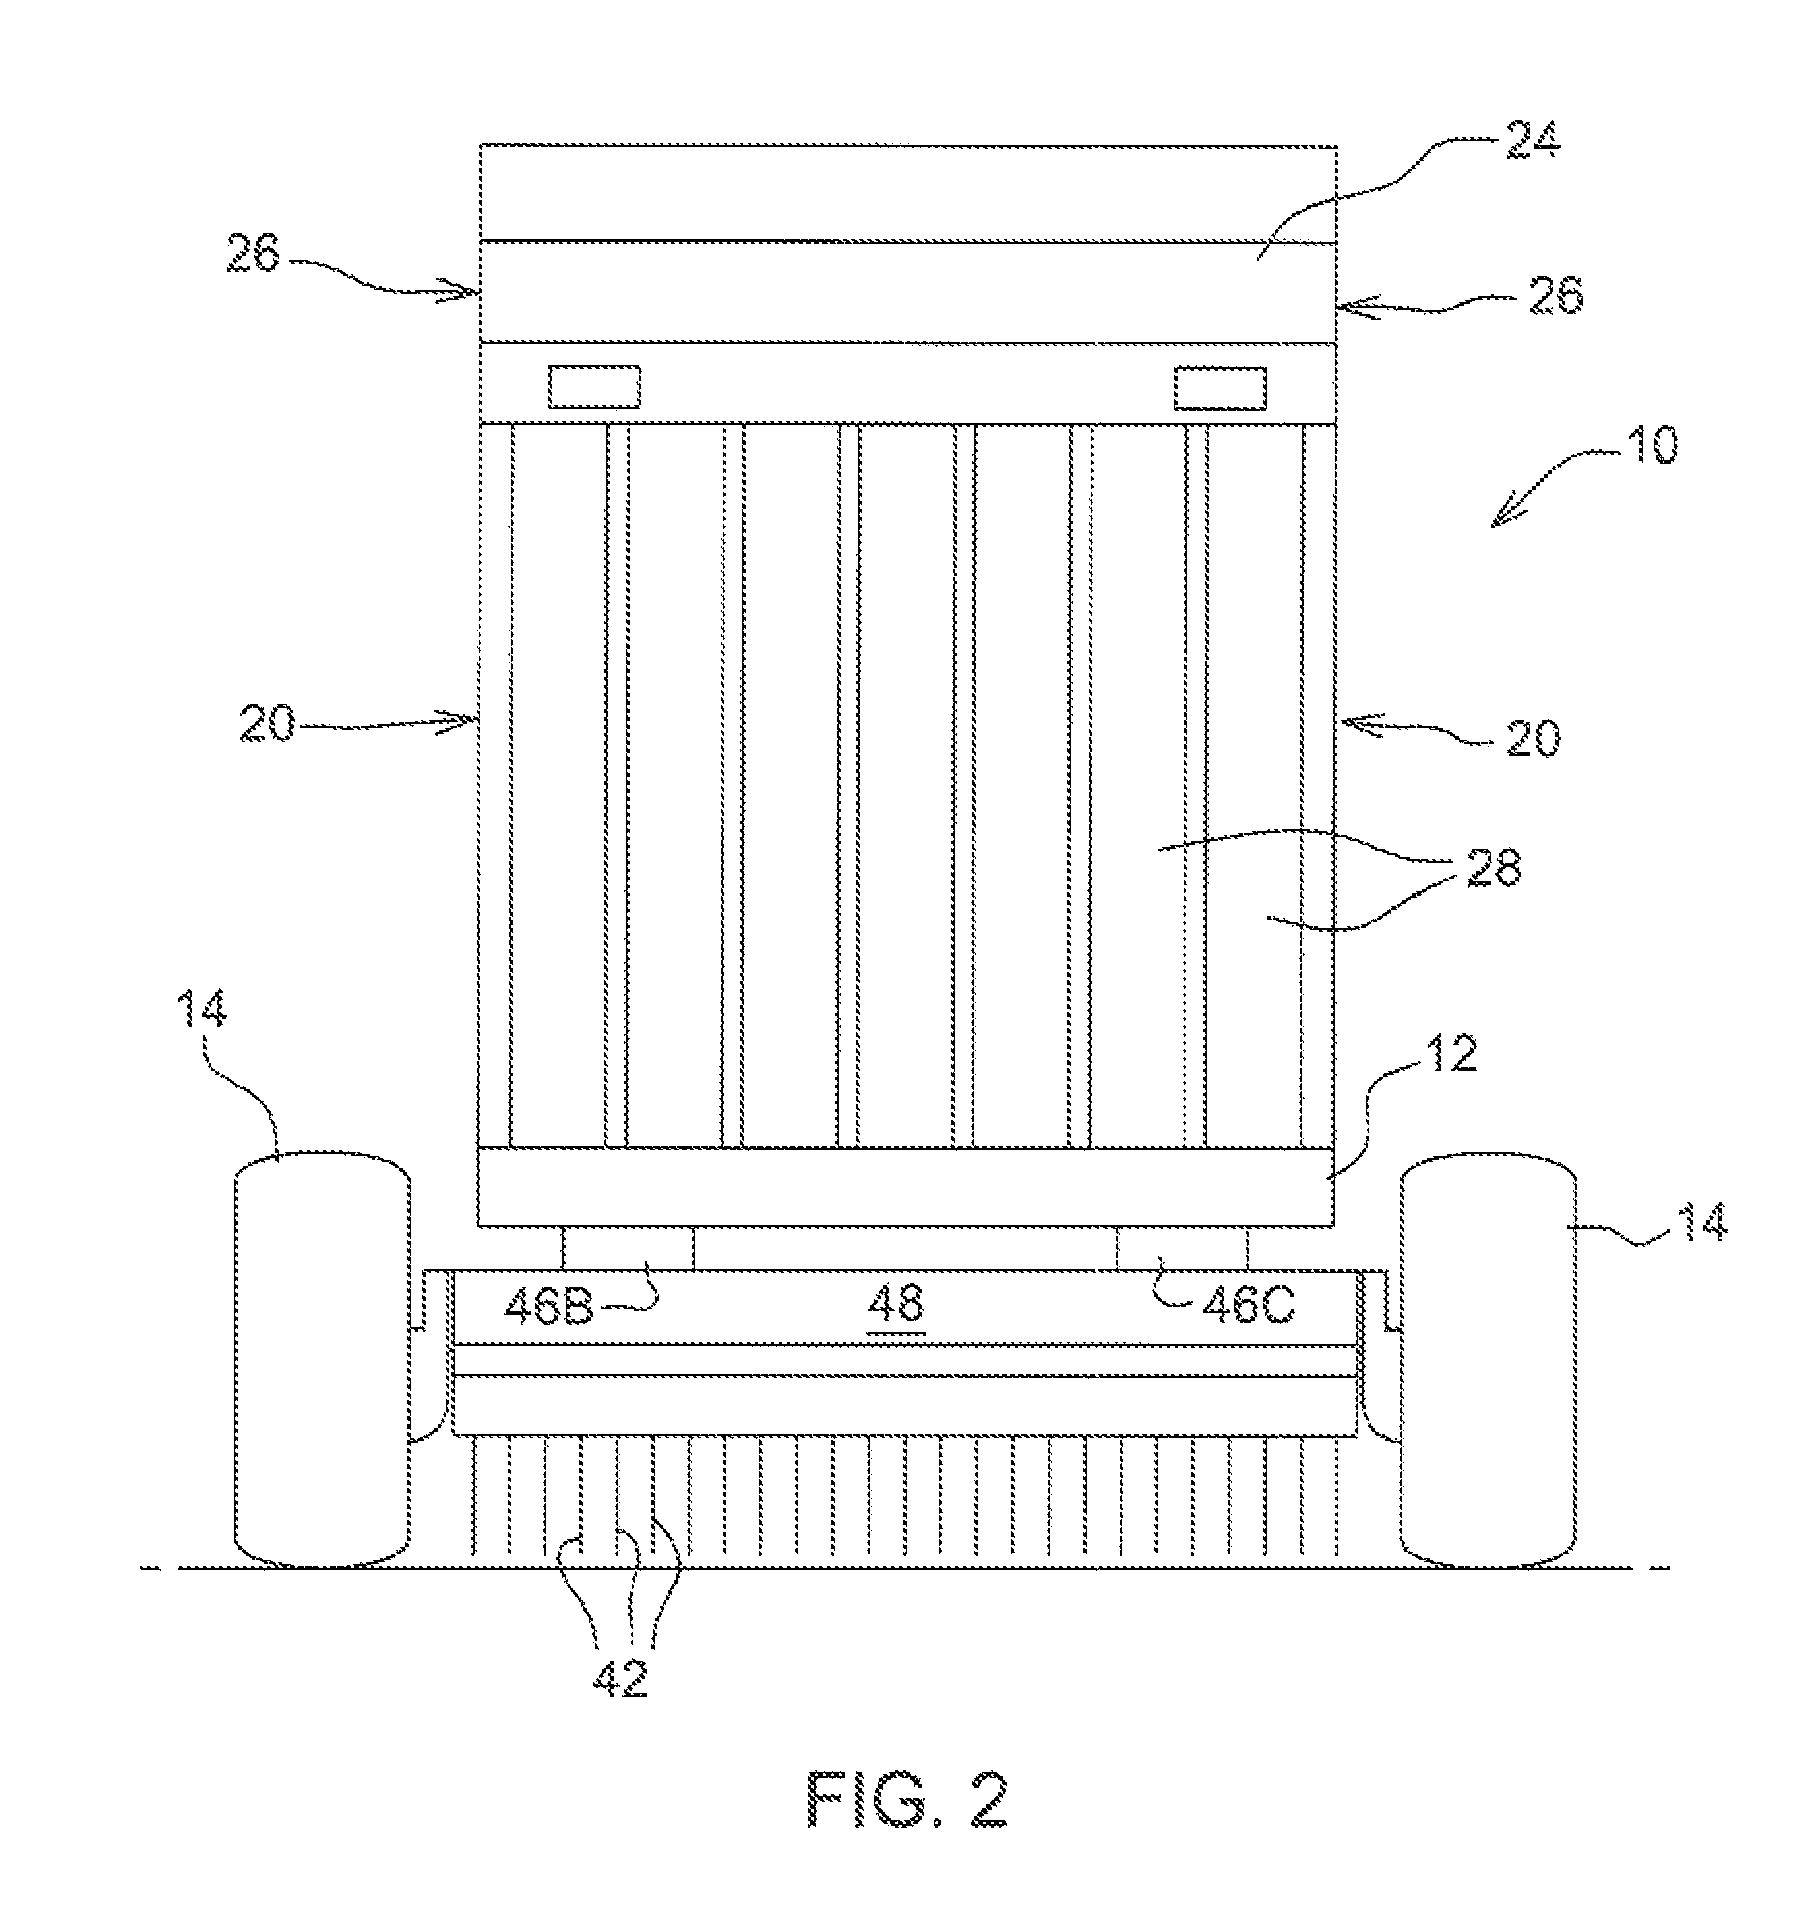 Method for determining agricultural bale weight